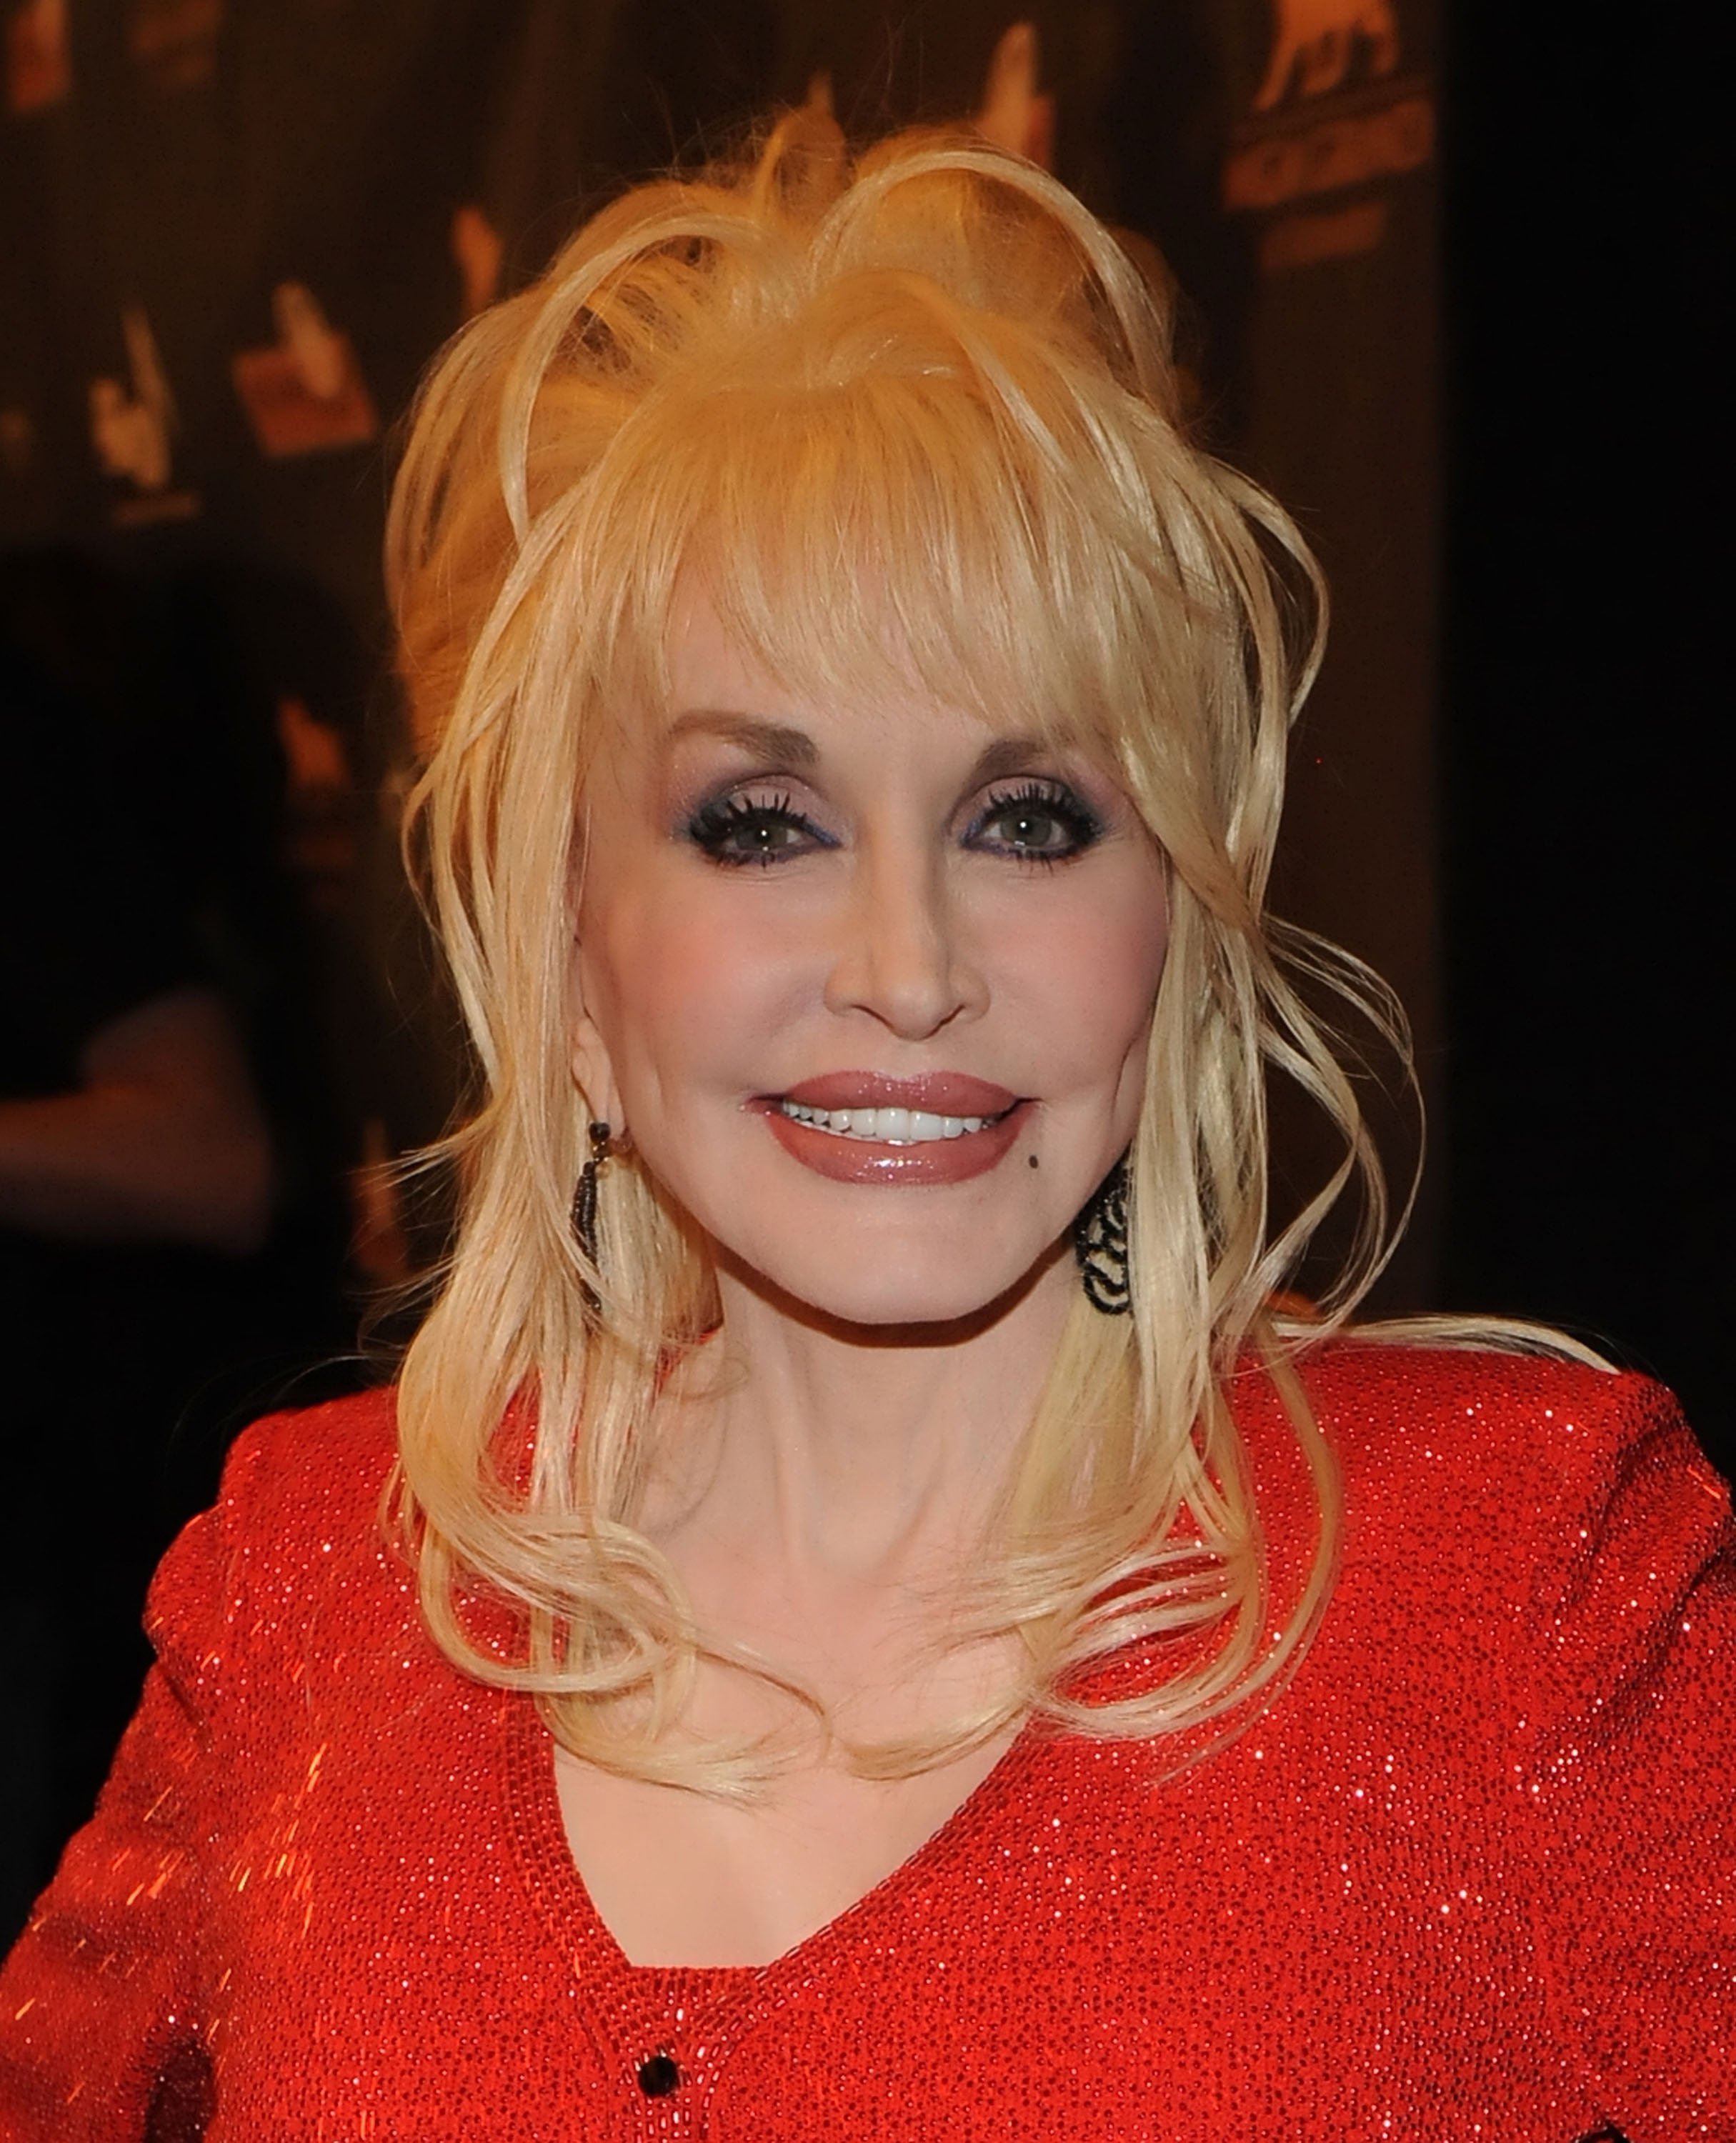 Dolly Parton attends the Kenny Rogers: The First 50 Years award show in Ledyard Center, Connecticut on April 10, 2010 | Photo: Getty Images